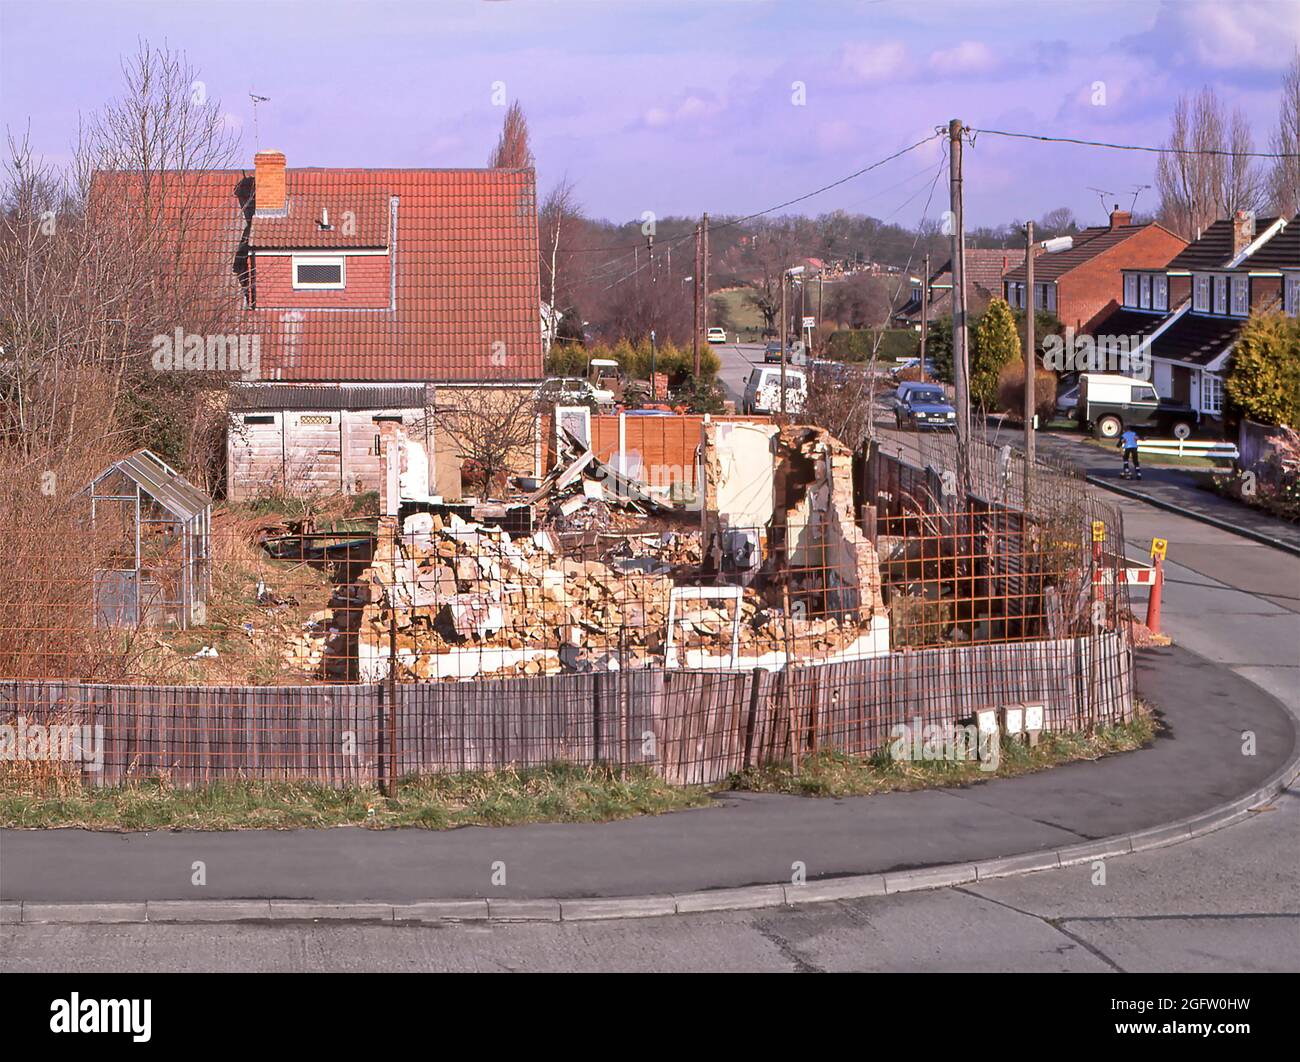 1998 archive view of existing bungalow home built between the wars on a village corner plot of land partly demolished to clear this building site for the construction of a new 1990s modern detached house in a sought after rural countryside community 90s archival image in Essex England UK Stock Photo